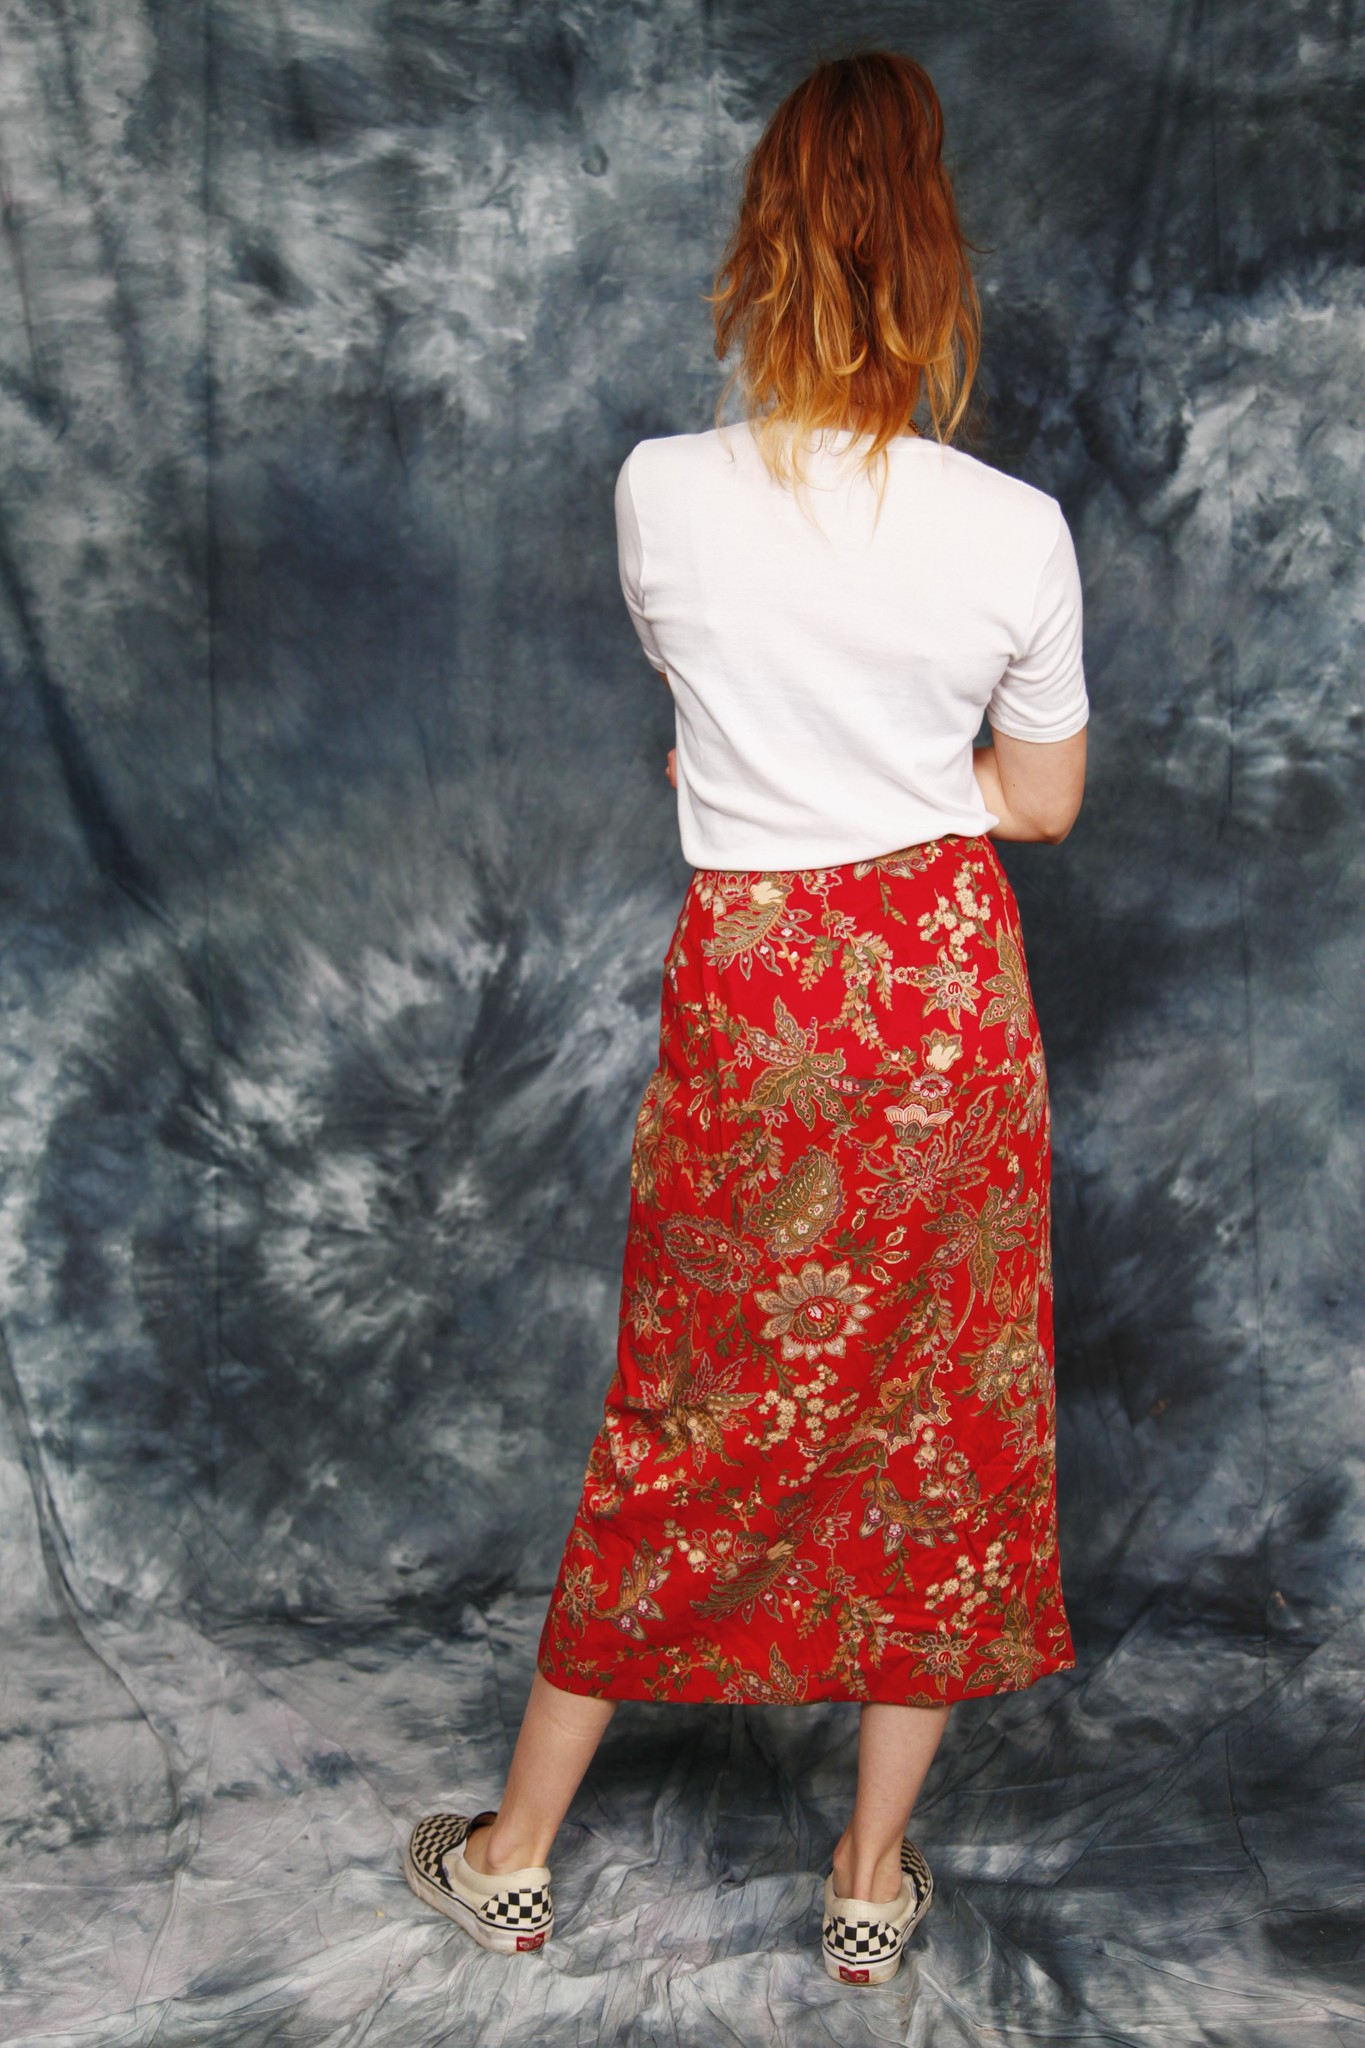 Floral 90s skirt in red